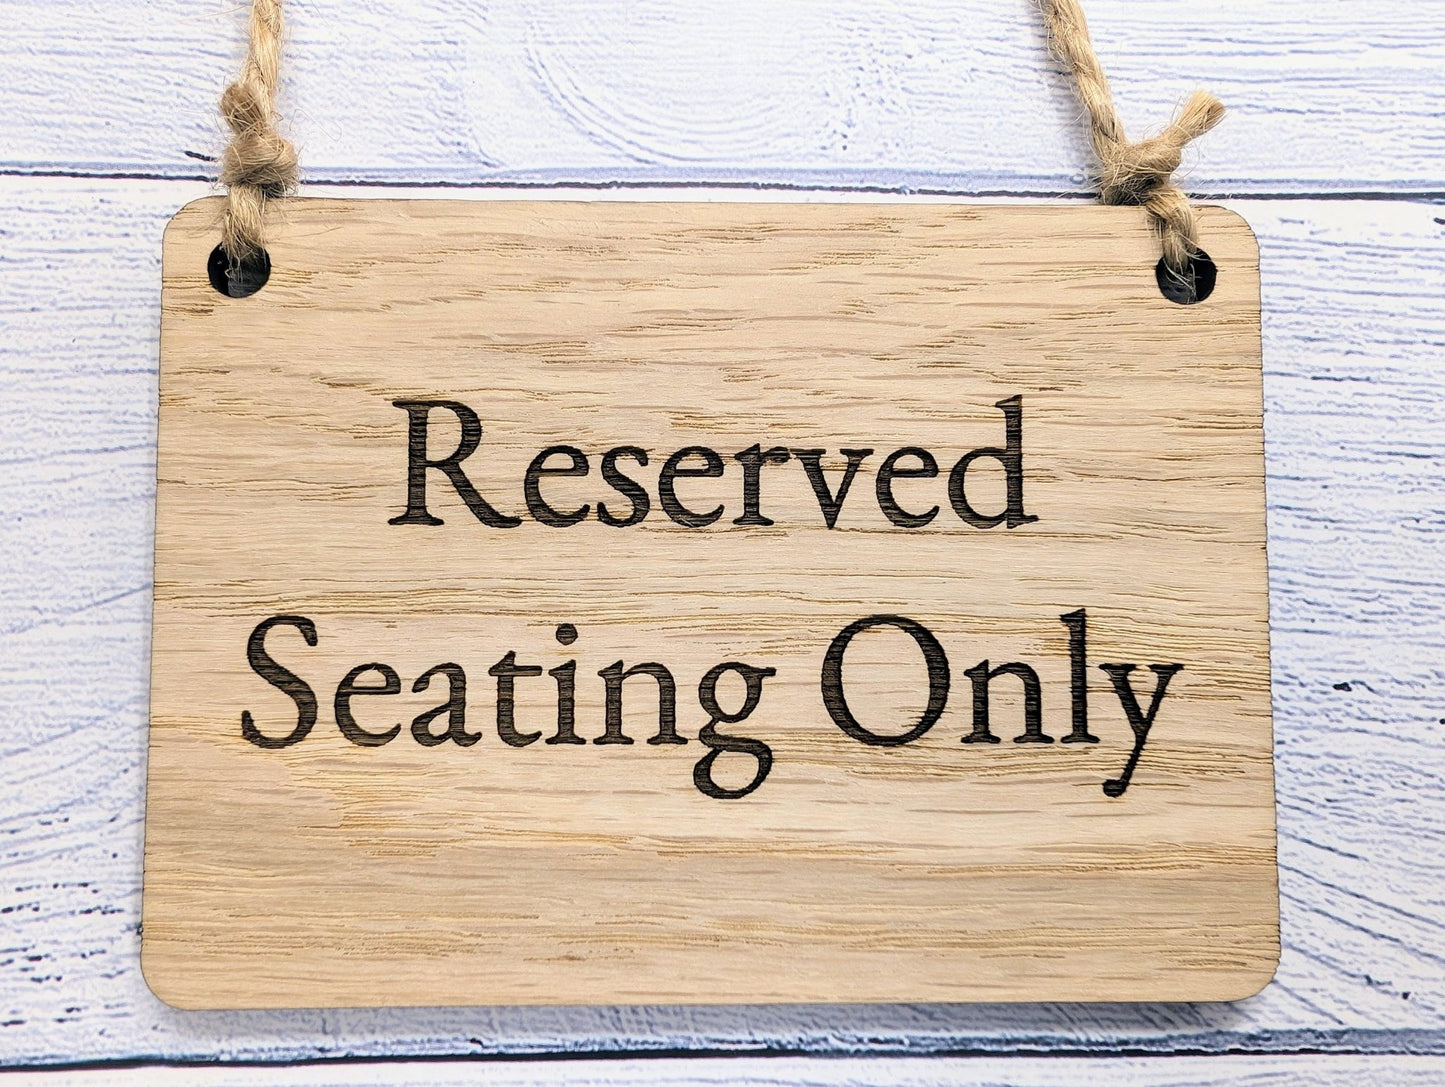 Reserved Seating Only Wooden Sign - Elegant Indoor Signage - Available in 4 Sizes - Door Sign, Wall Sign, Bulk Welcome - CherryGroveCraft